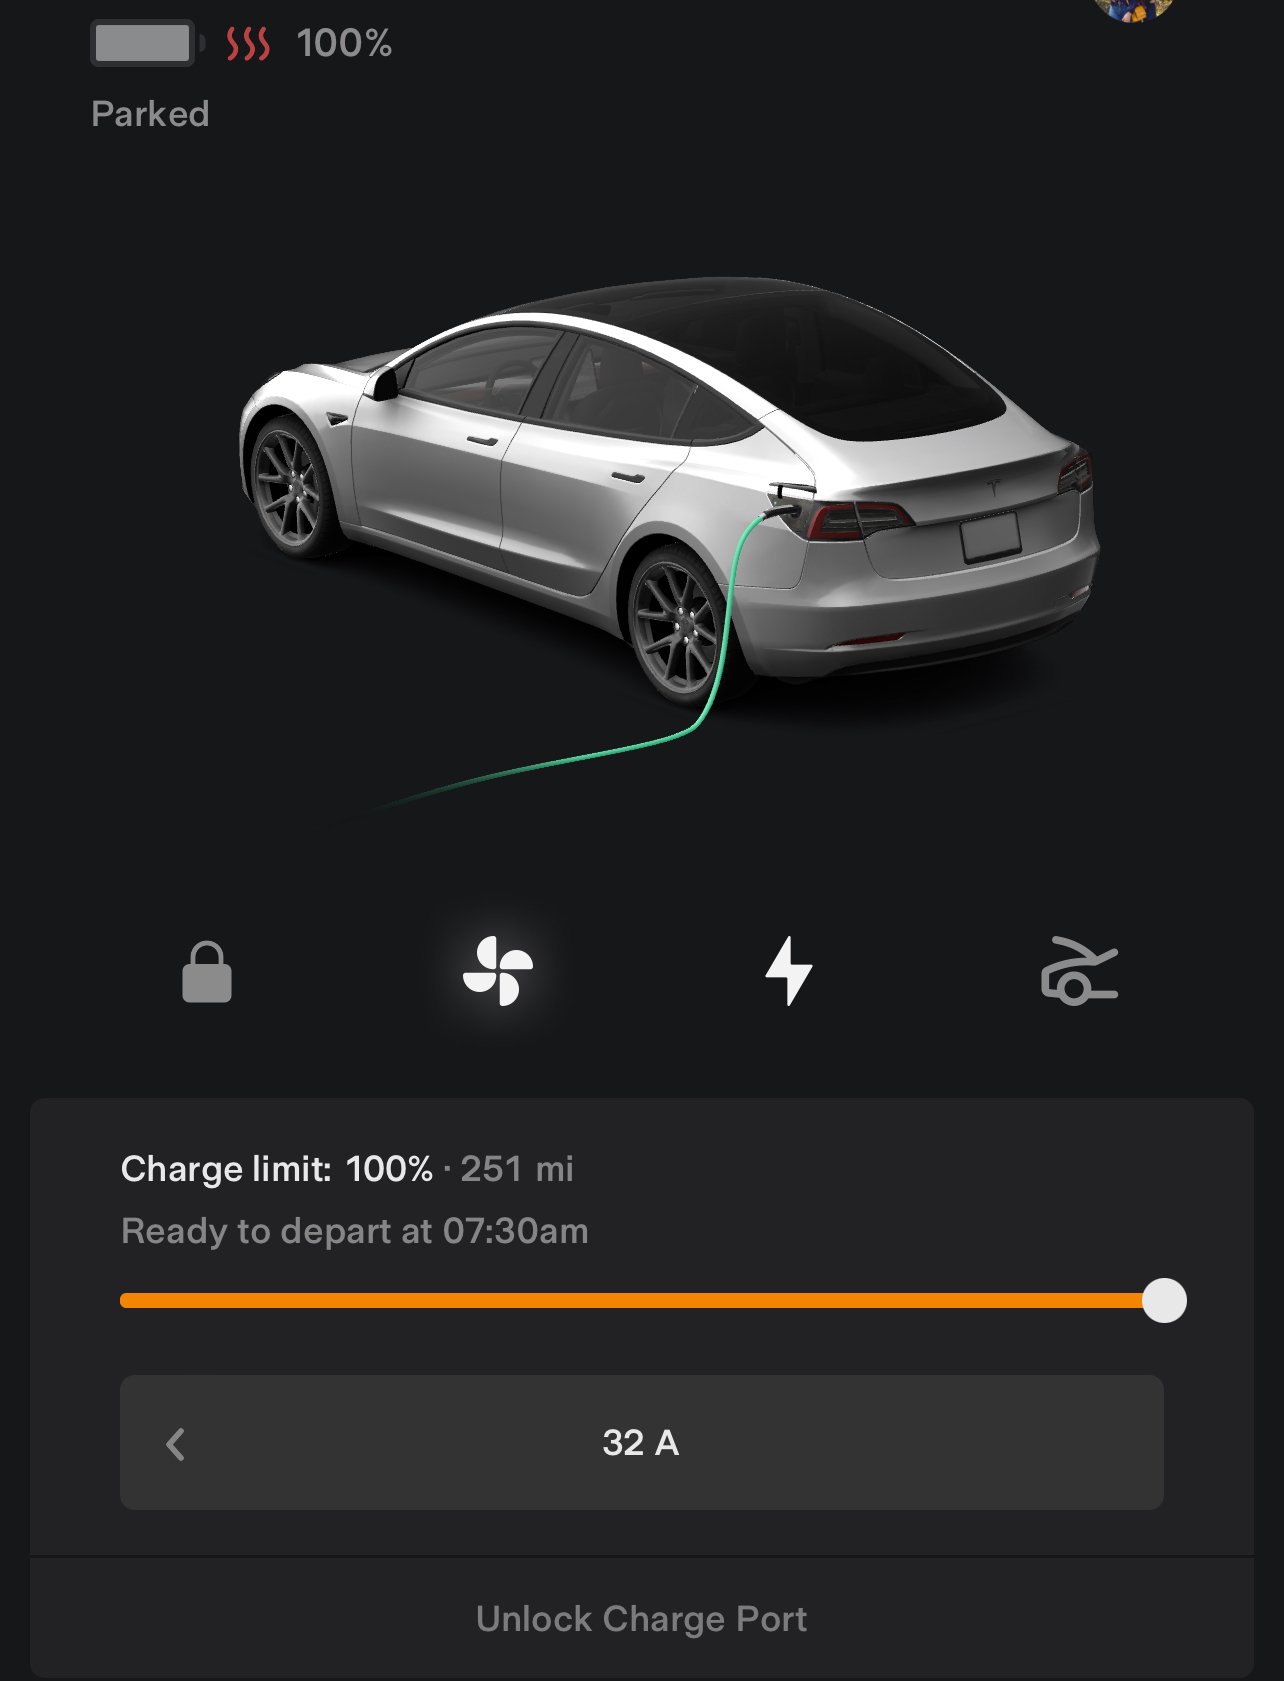 Is Electricity Free For Tesla